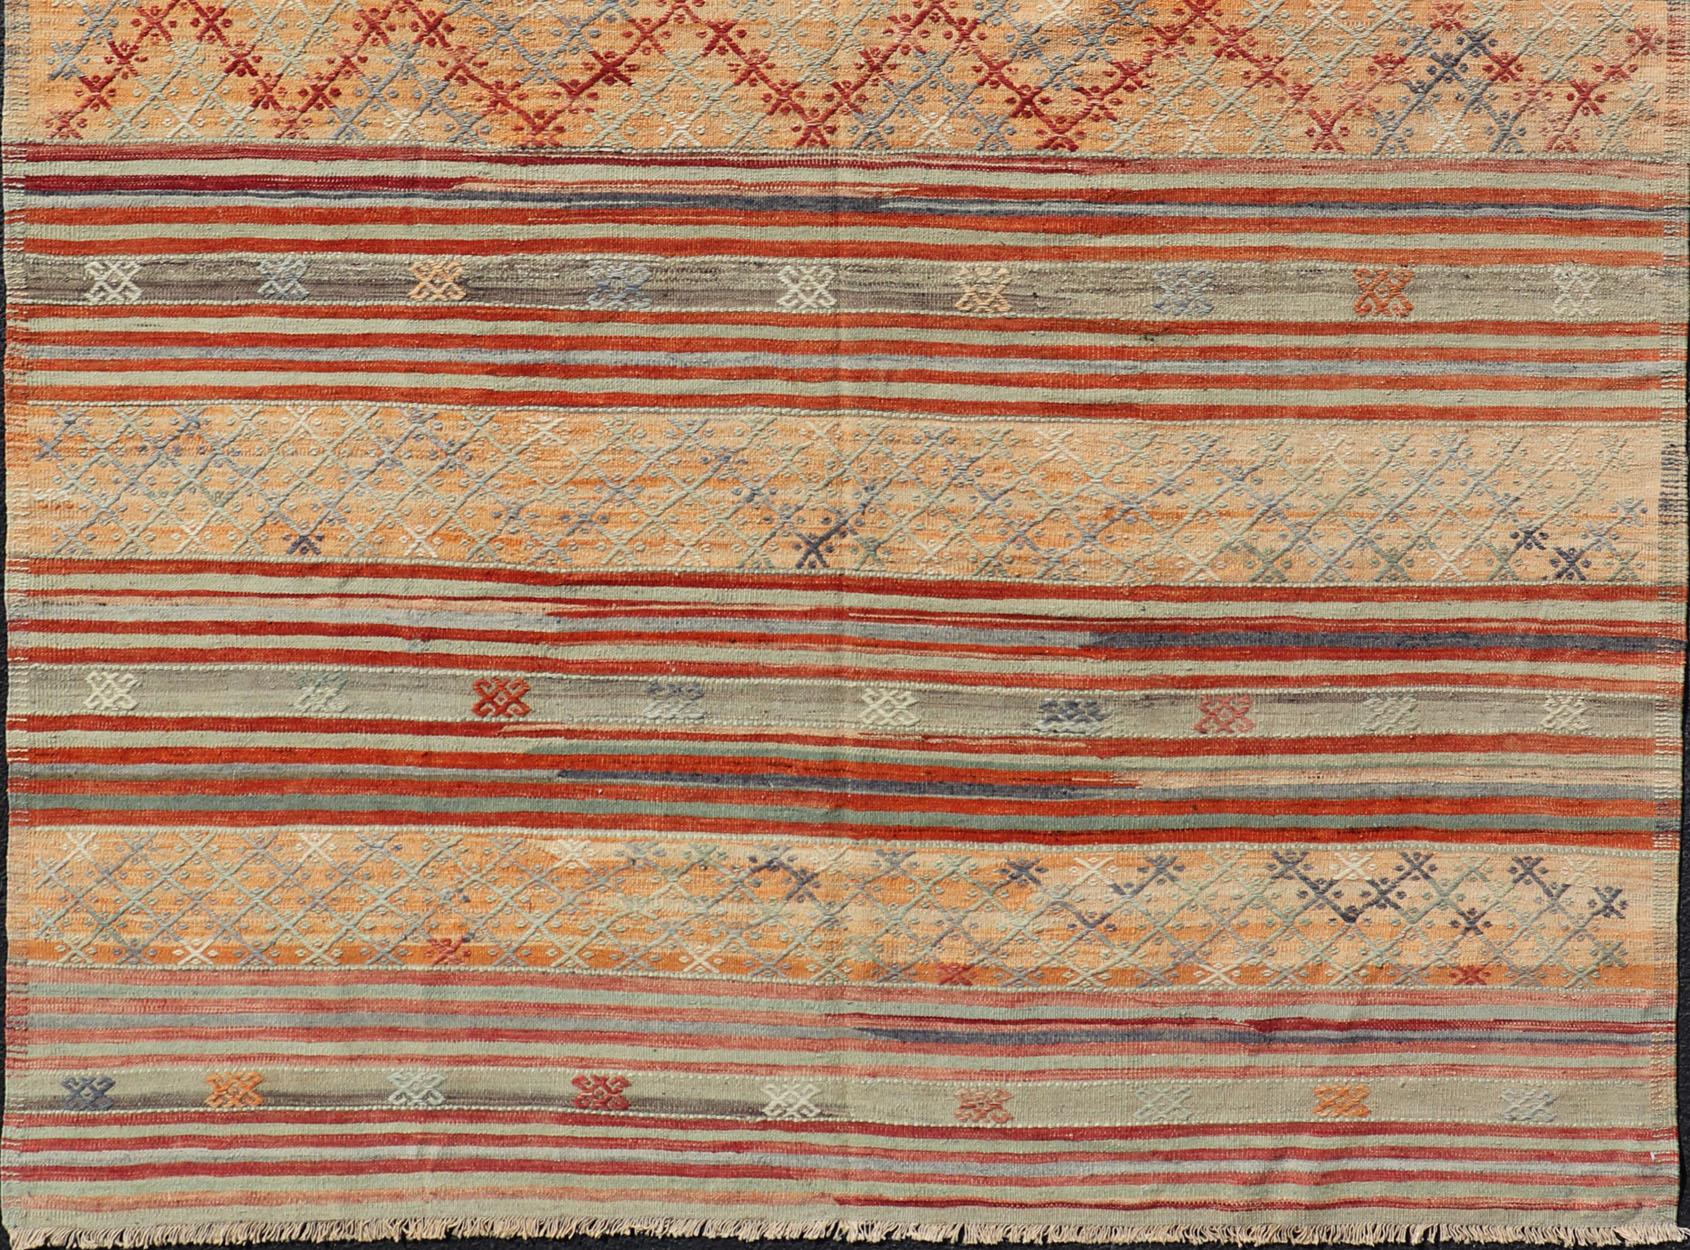 Colorful Vintage Turkish Embroidered Kilim with Stripes and Geometric Motifs  In Excellent Condition For Sale In Atlanta, GA